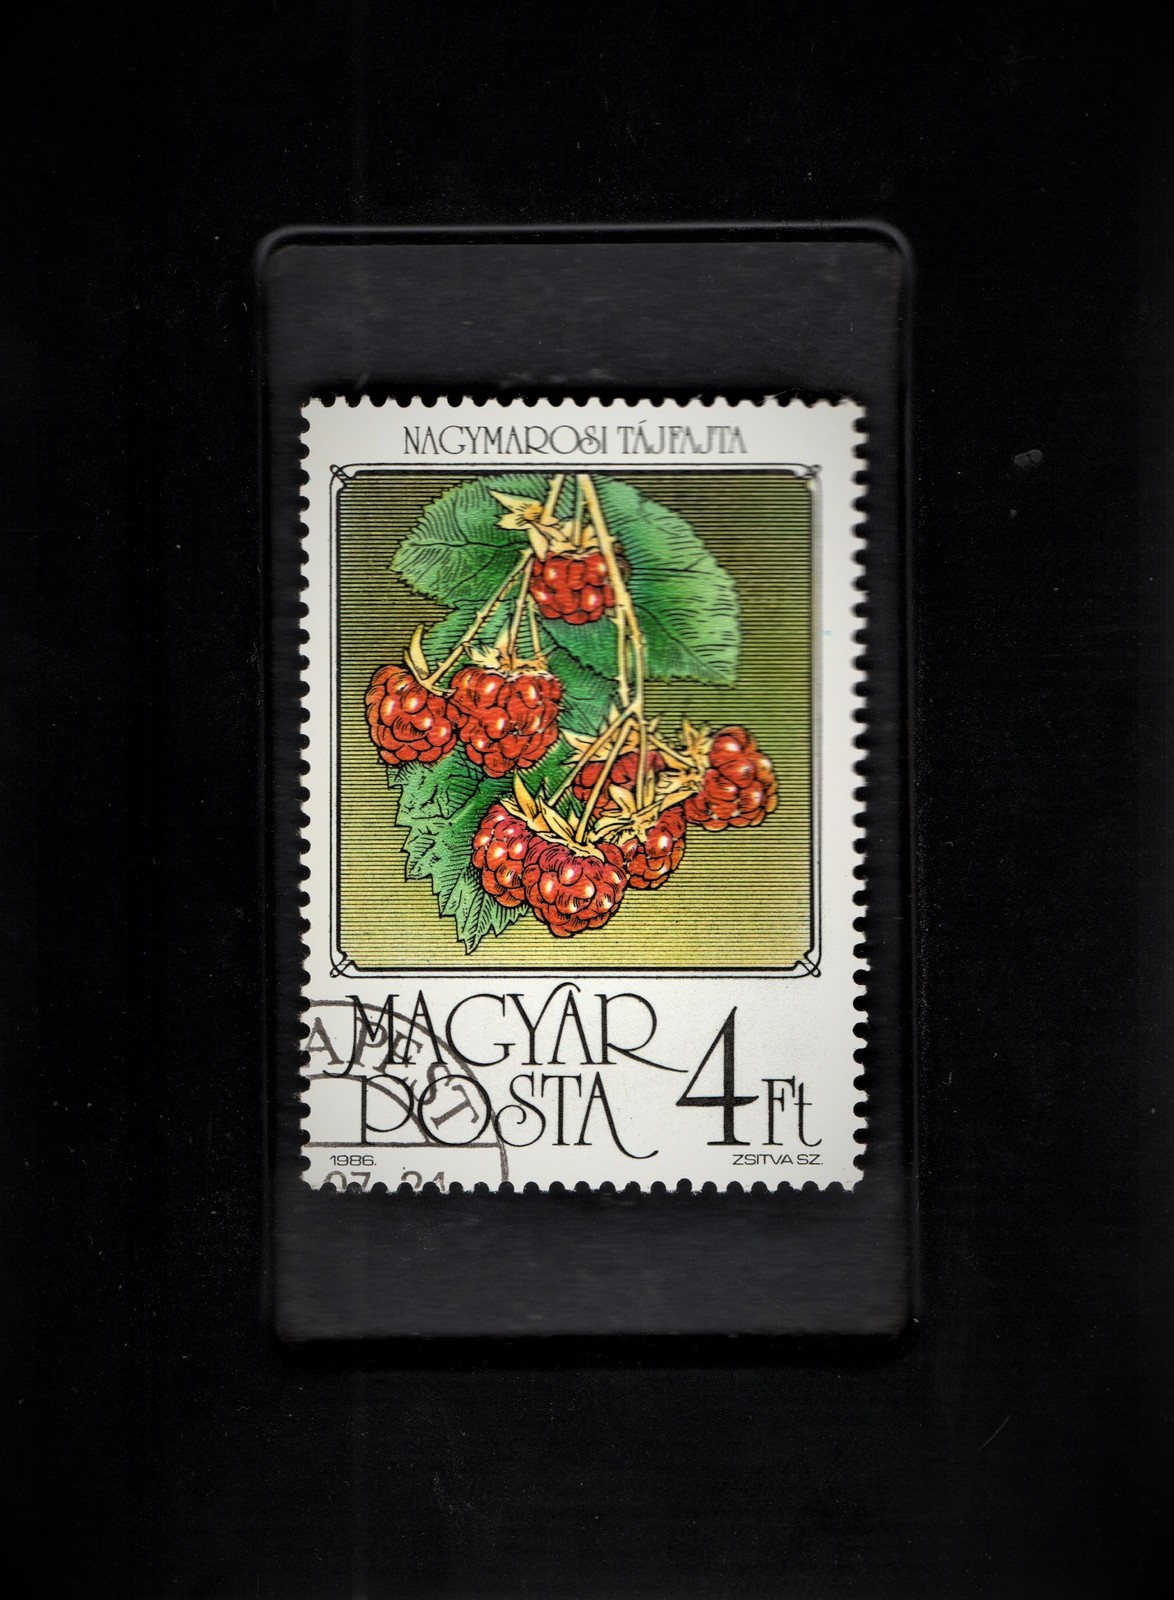 Primary image for Framed Stamp Art - Postage Stamp from Hungary - Raspberries